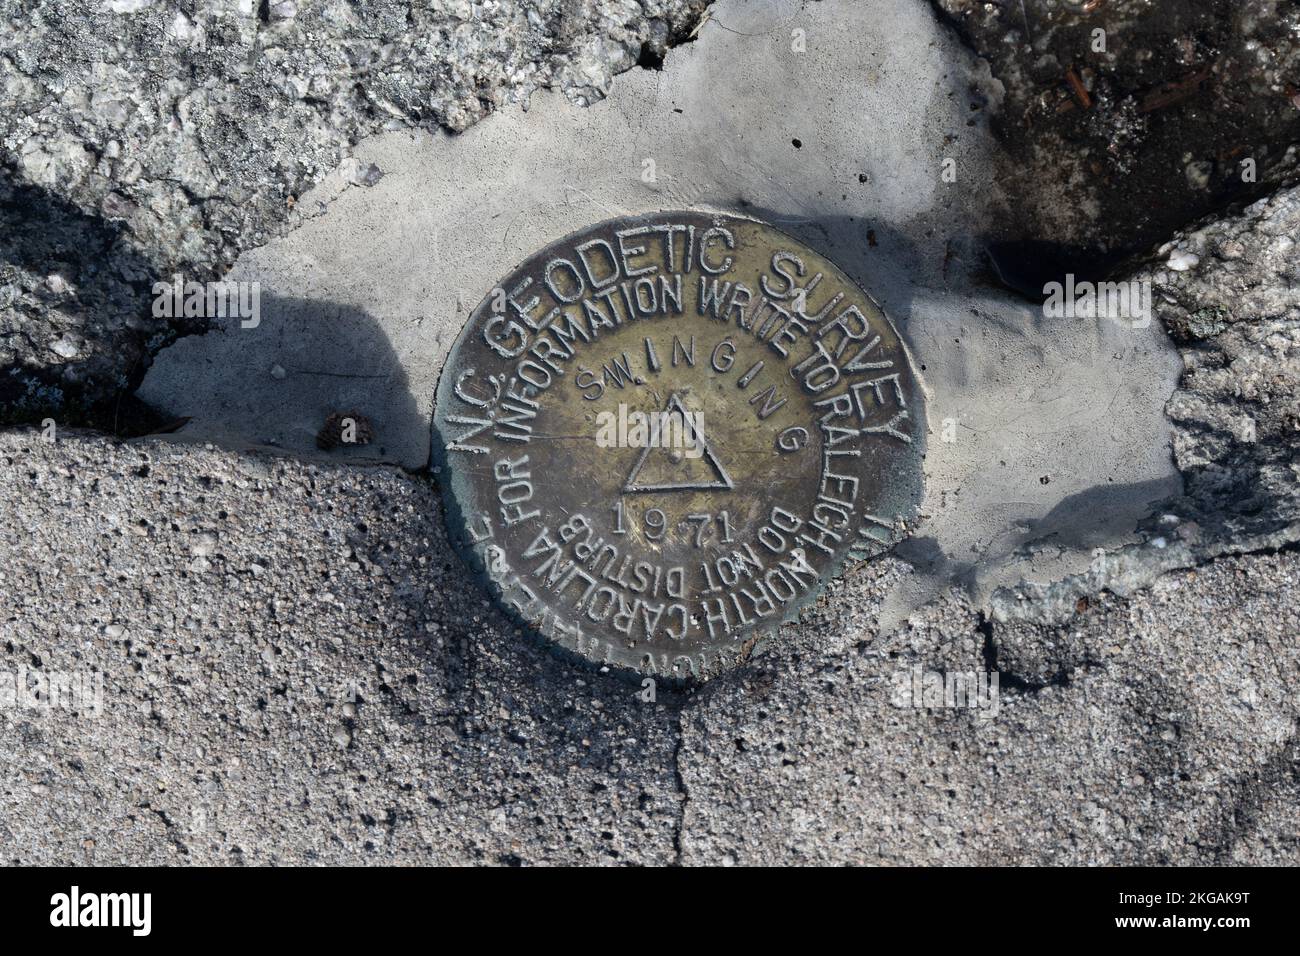 A Noth Carolina Geodetic Survey Marker found on top of Grandfather Mountain Stock Photo